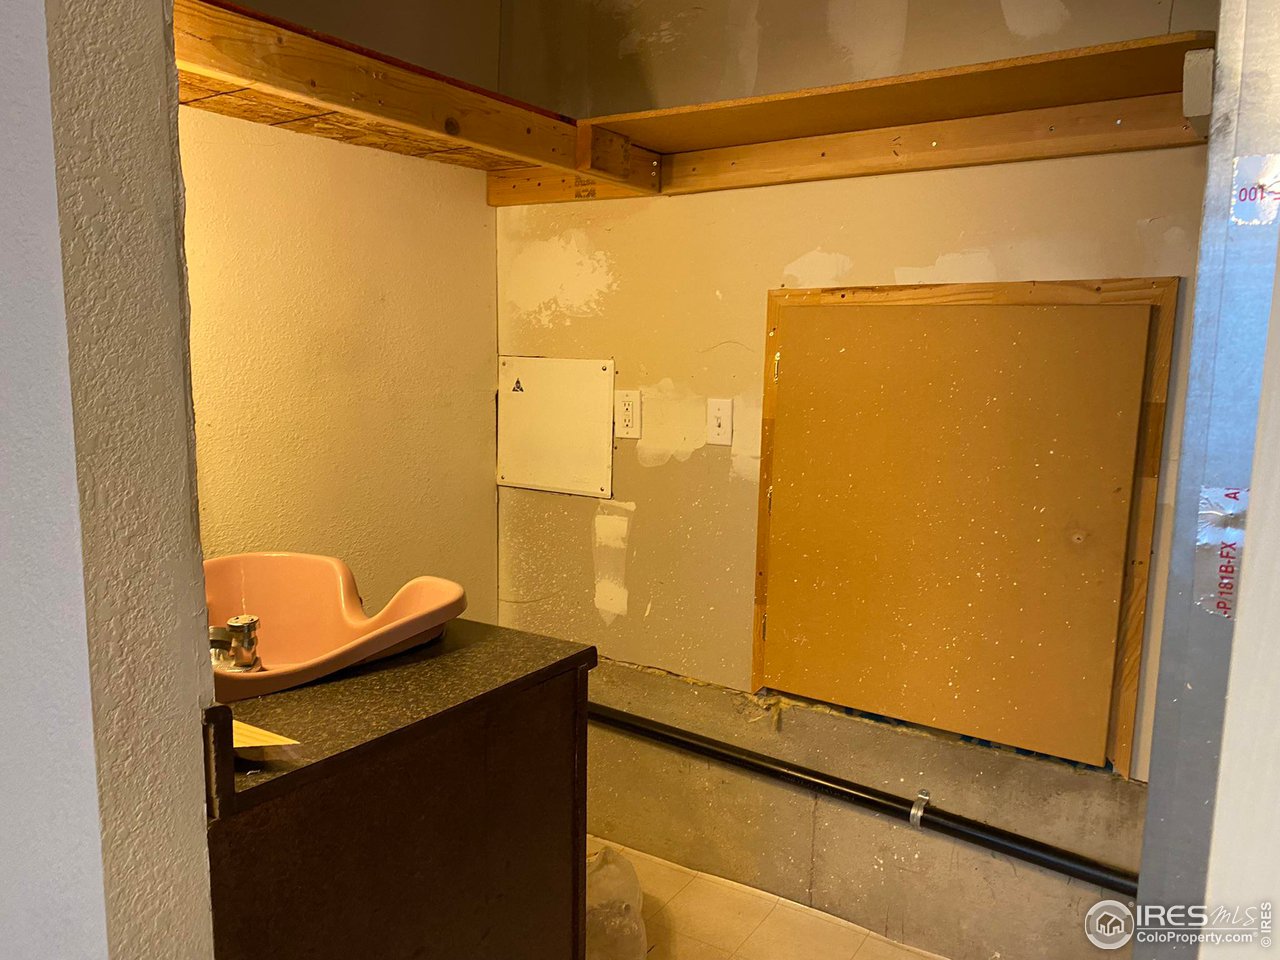 Access to crawl space and hairdressing sink. Located in Utility closet in basement